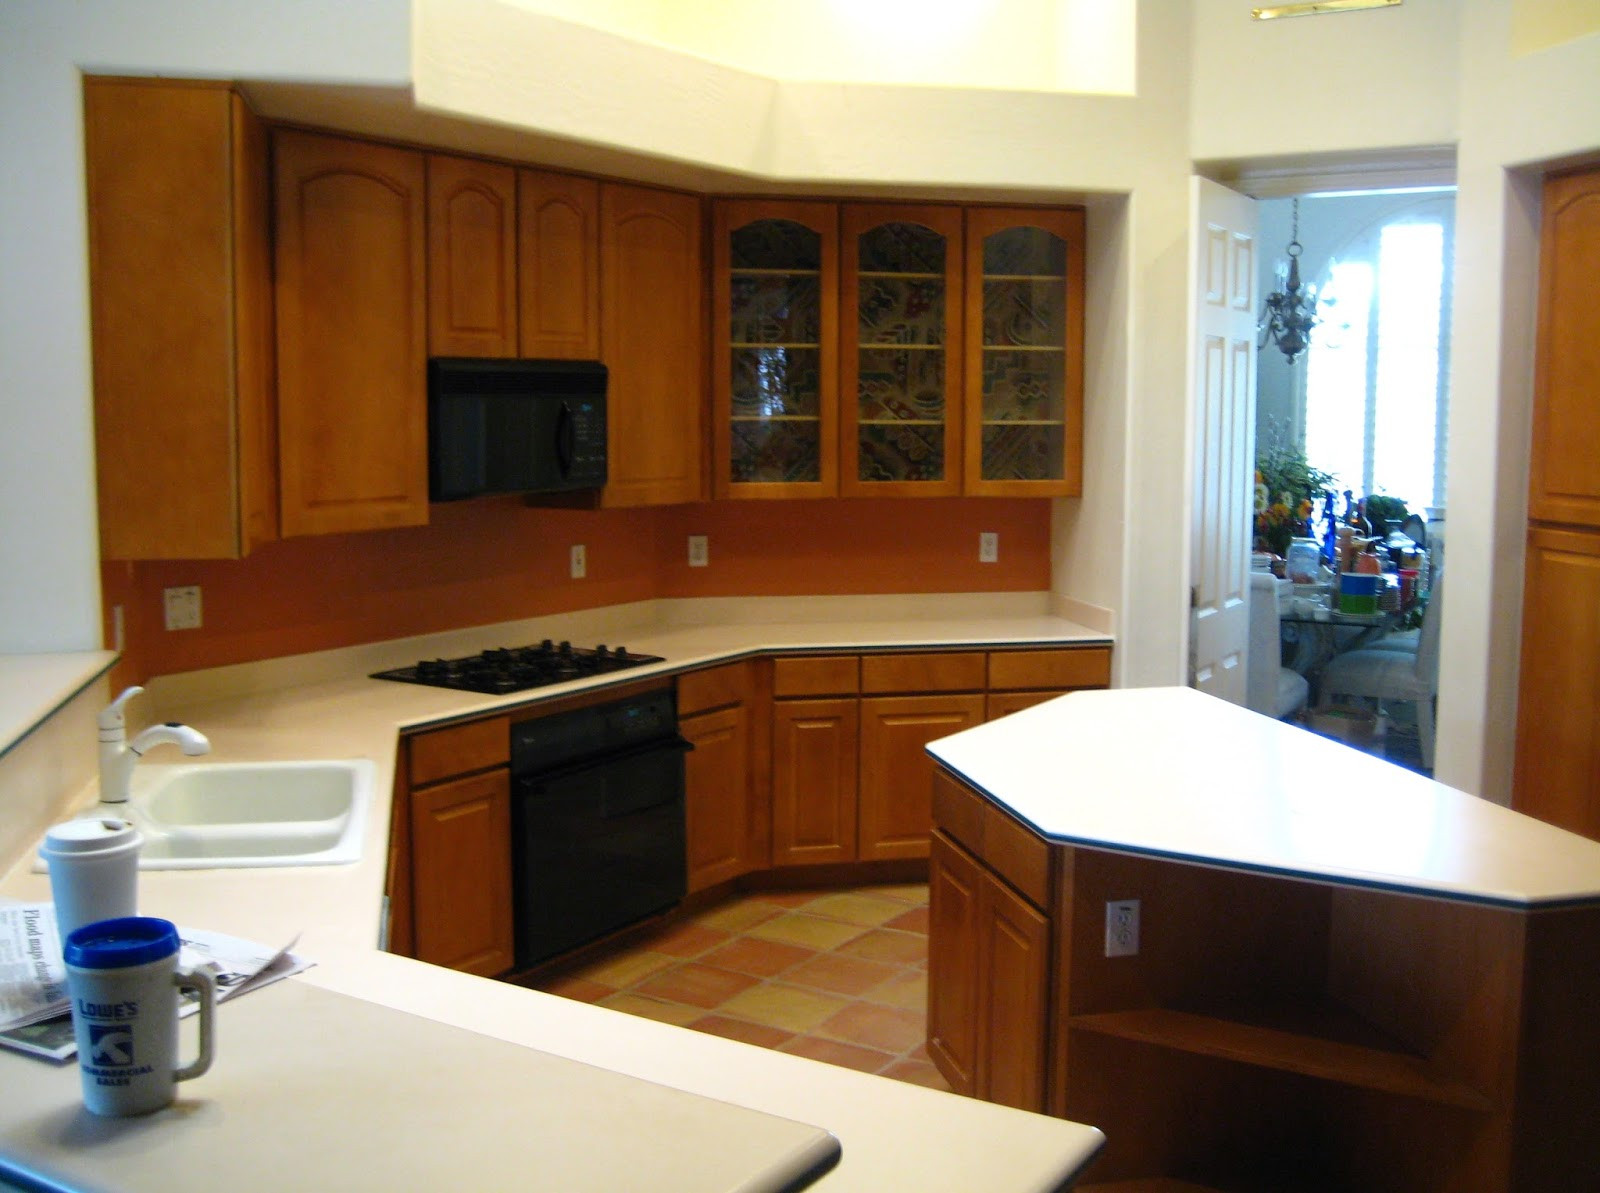 Remodeling Kitchen On A Budget
 Do it Yourself DIY Kitchen Remodel on a Bud Country